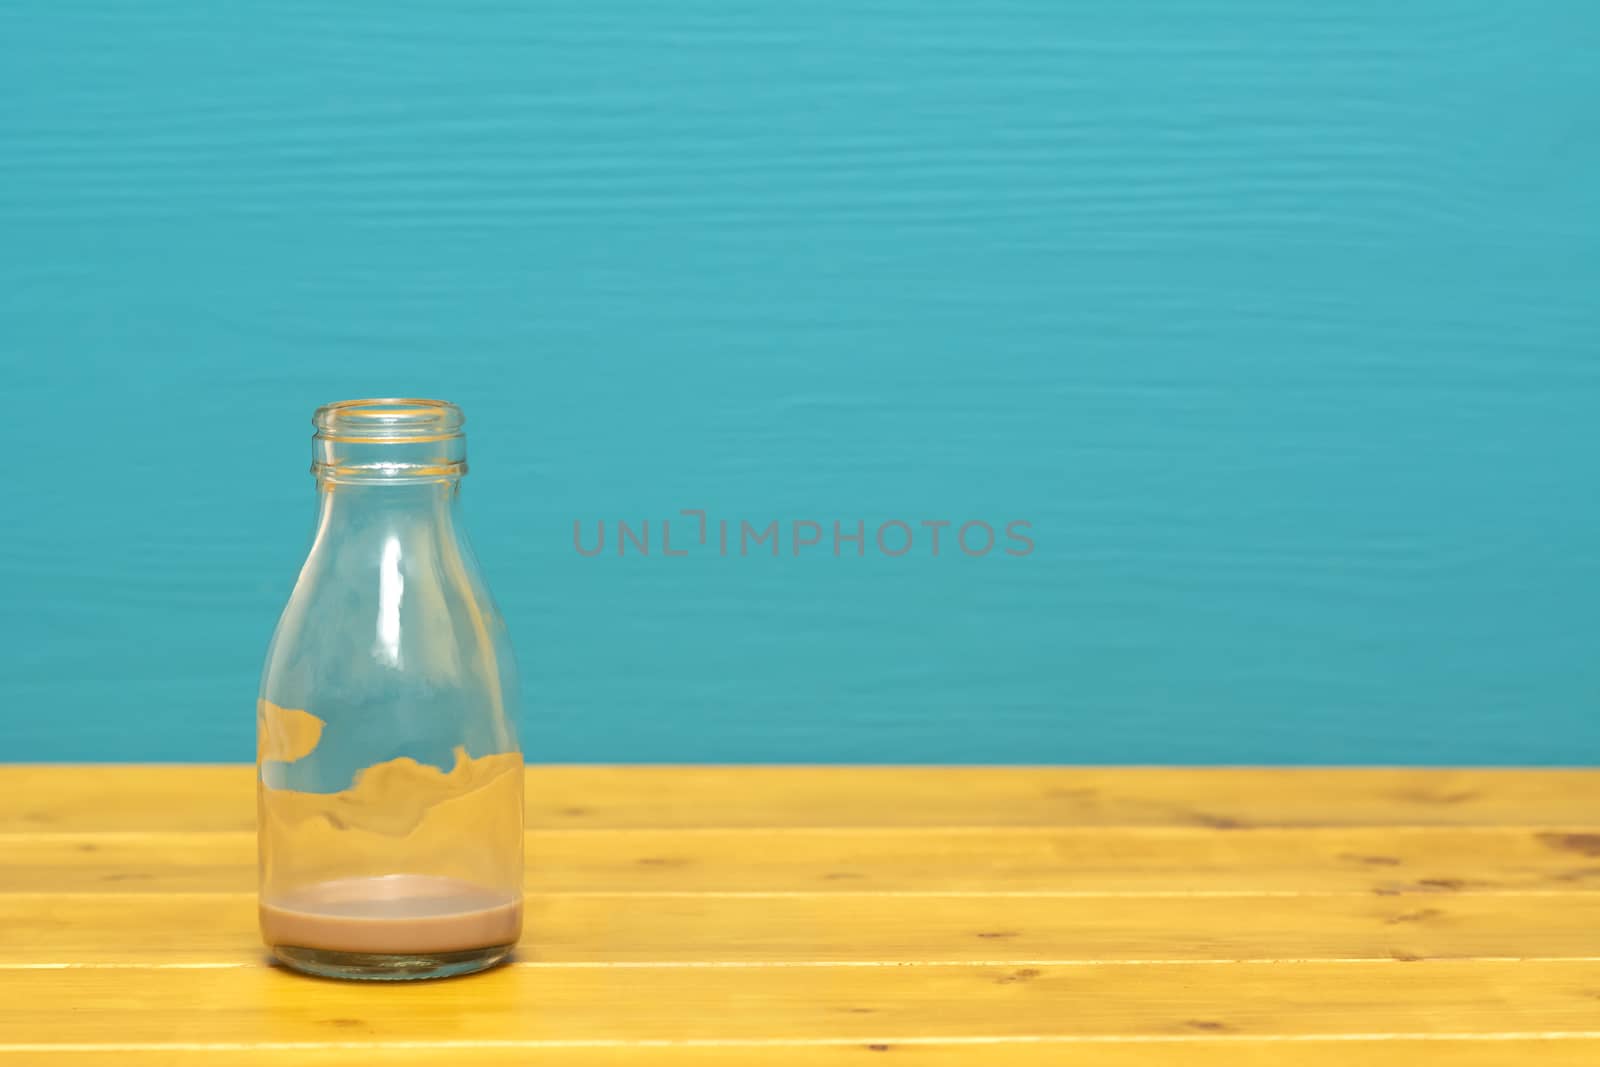 One-third pint glass milk bottle with dregs of chocolate milkshake, on a wooden table against a bright teal painted background